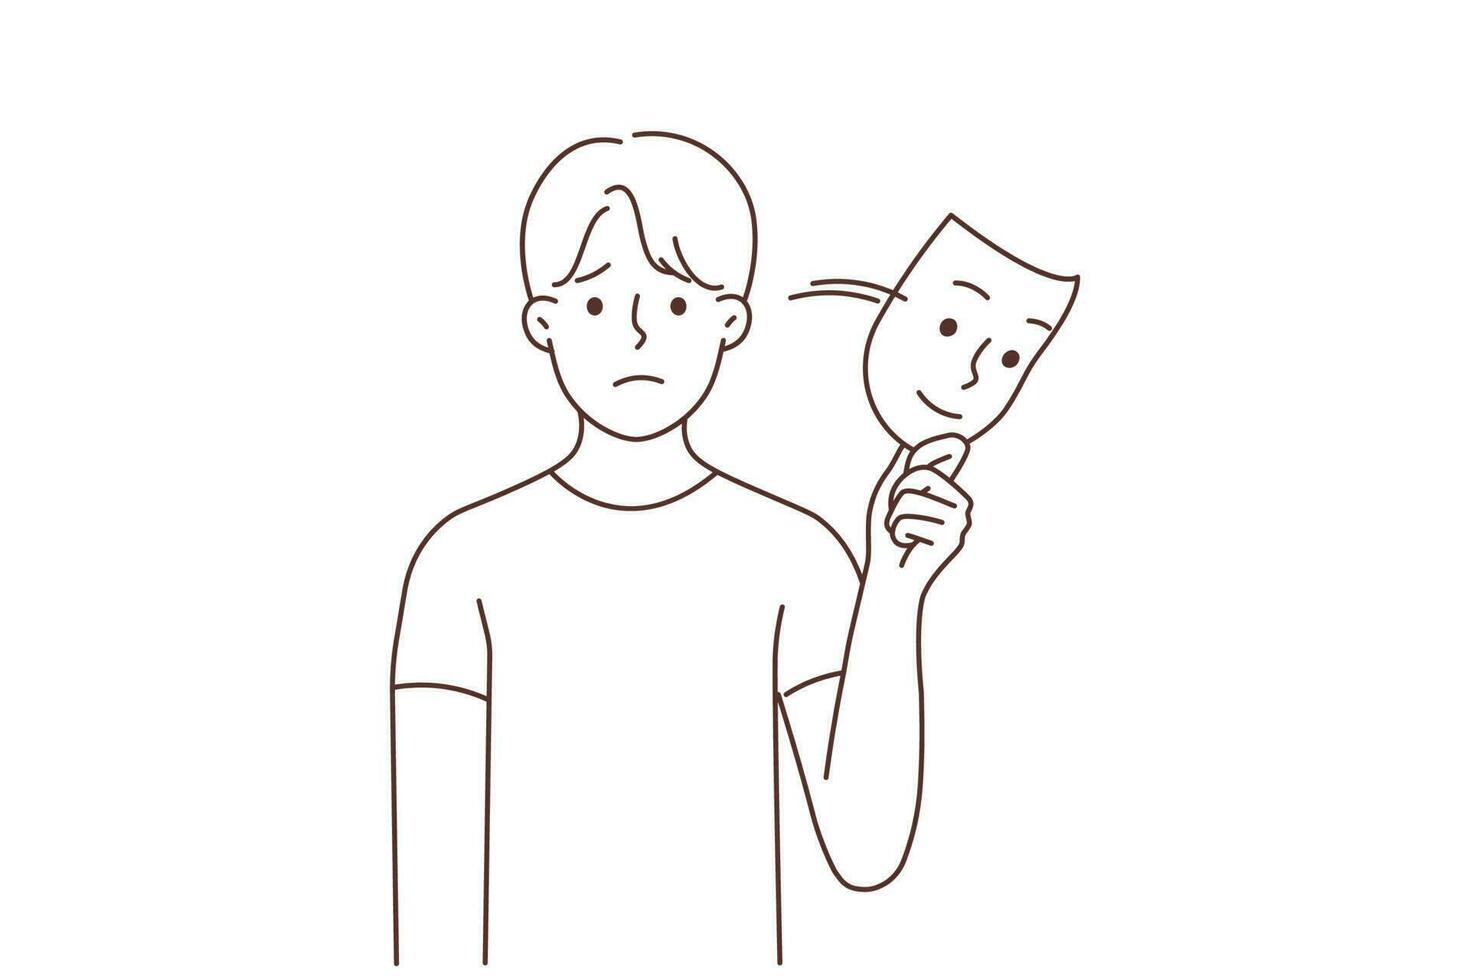 Unhappy man take off smiling mask show true self suffer from depression. Upset guy struggle with mood swing and bipolar disorder, pretend someone else. Vector illustration.